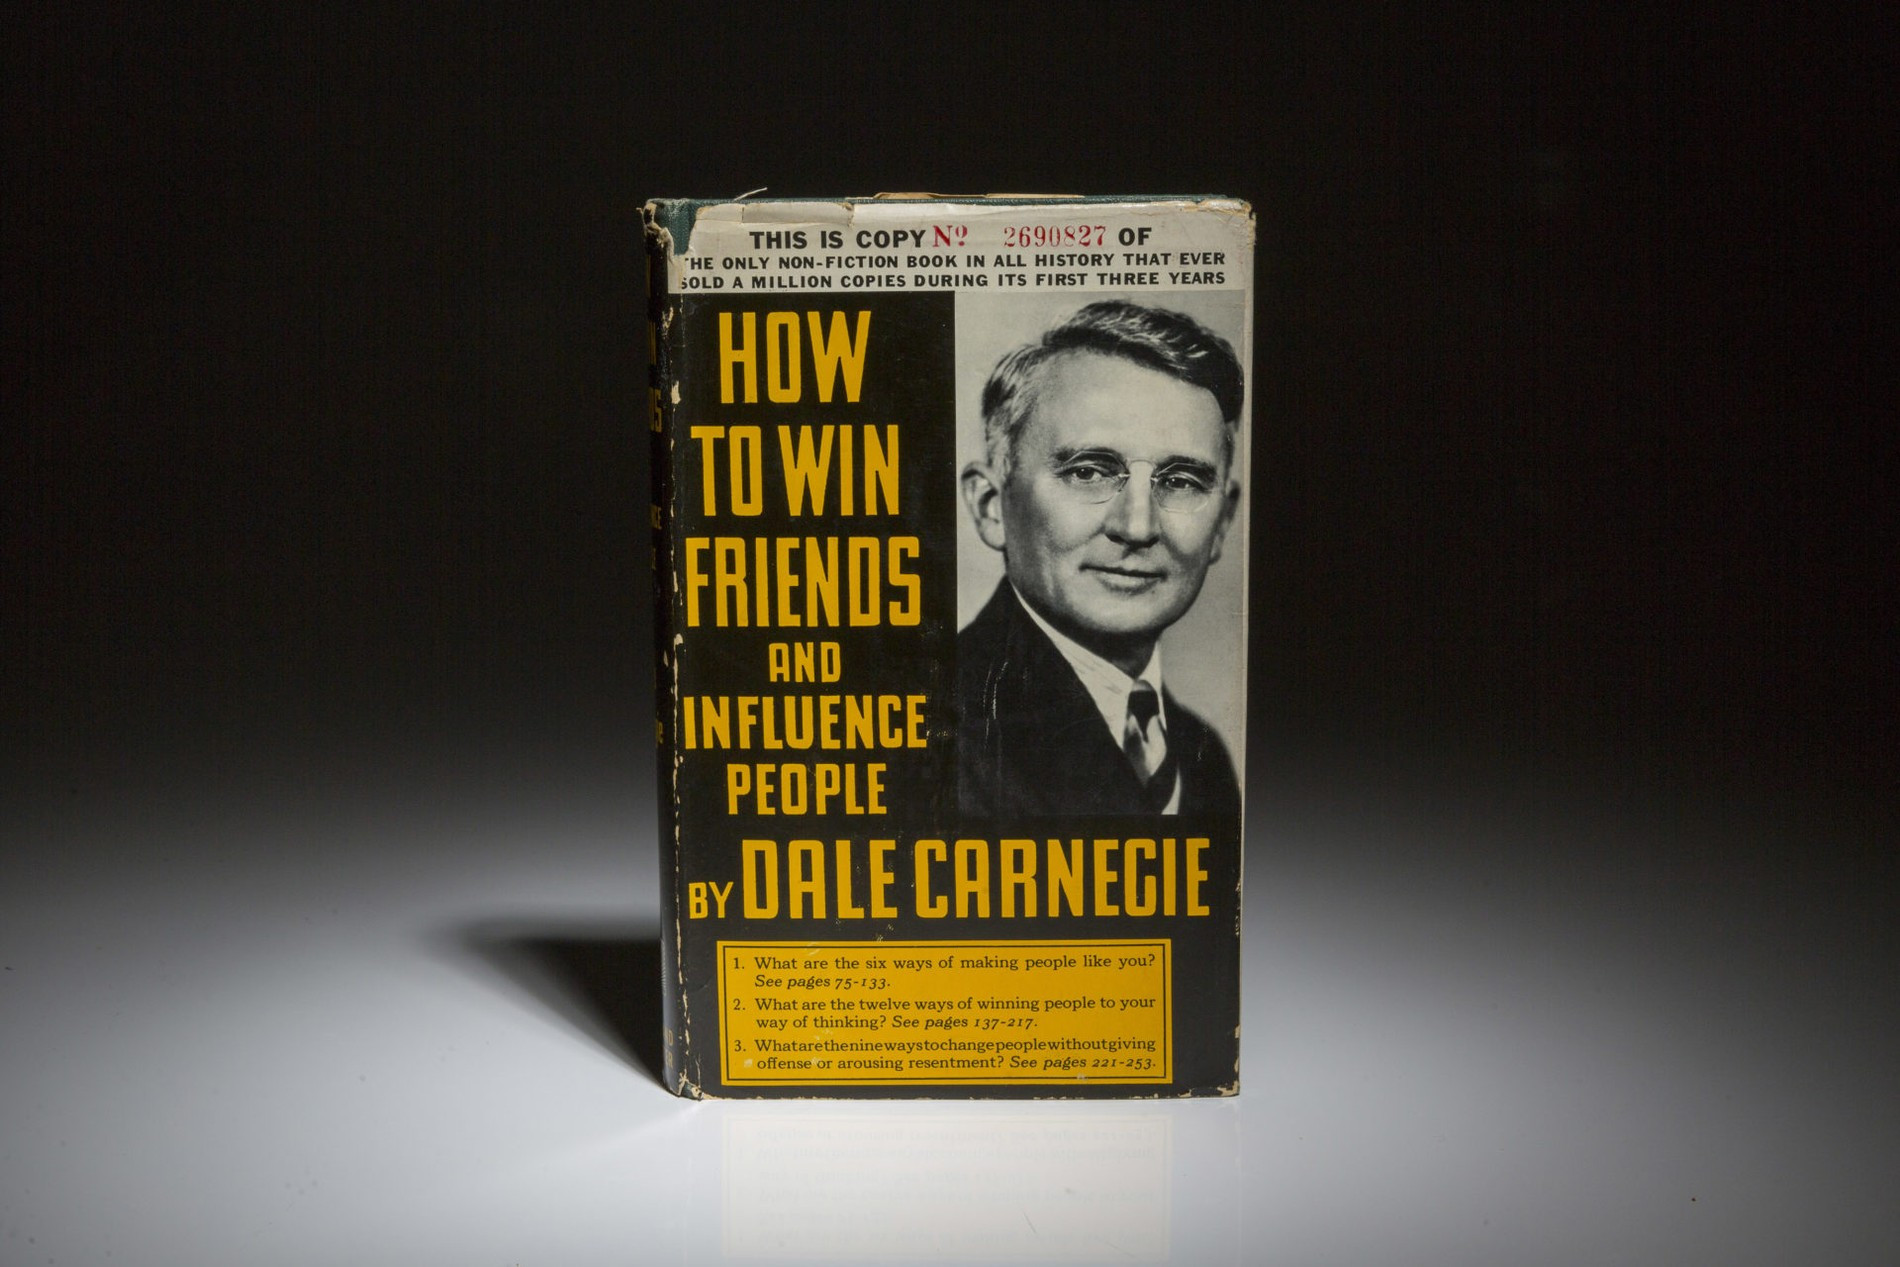 Карнеги искусство. How to win friends and influence people by Dale Carnegie. Дейл Карнеги how to win friends and influence people. How to win friends and influence people книга. Дейл Карнеги ораторское искусство.